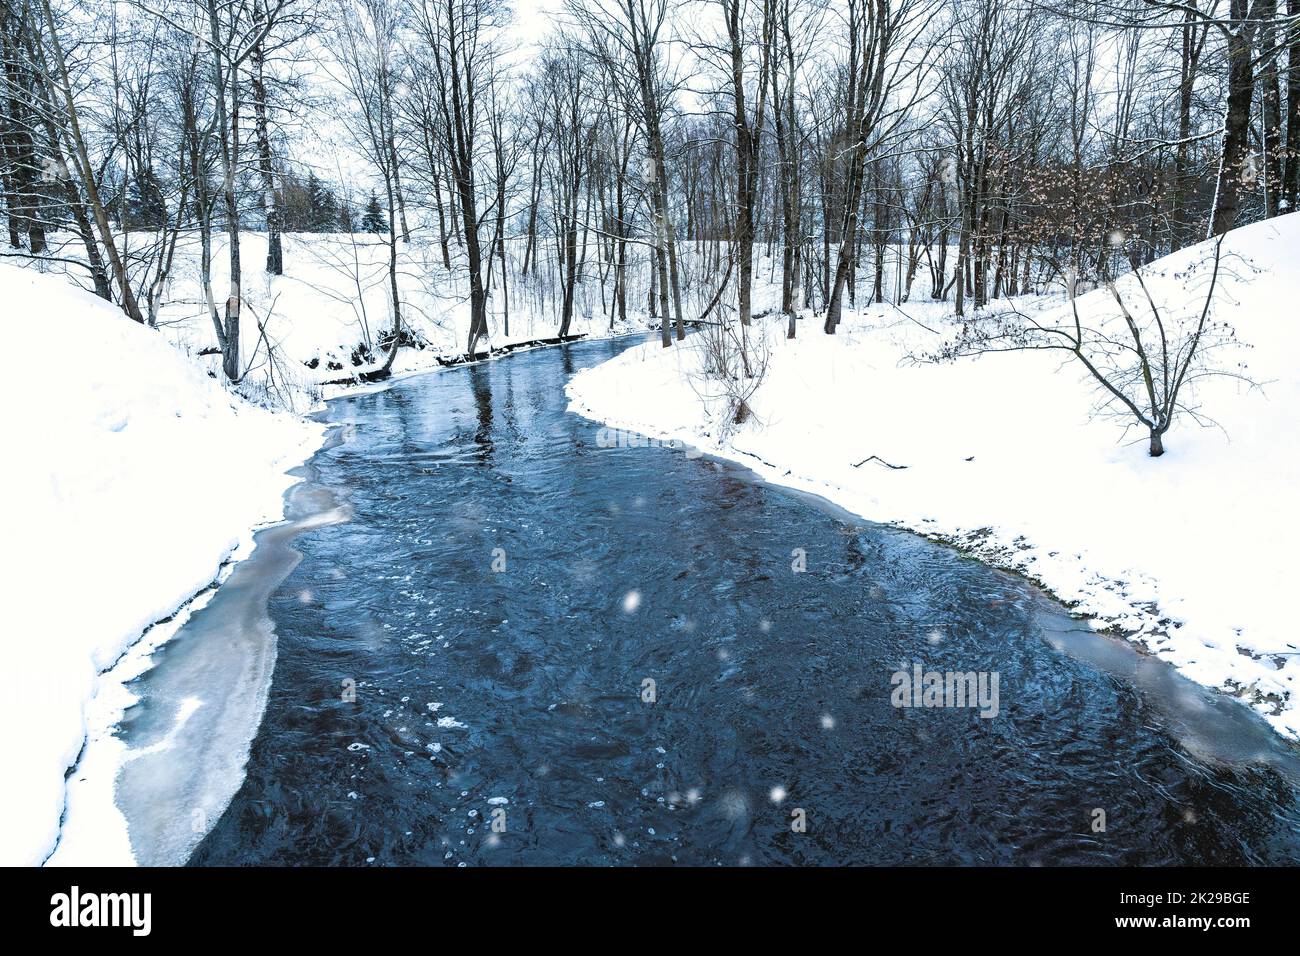 Winter forest river landscape in snow nature Stock Photo